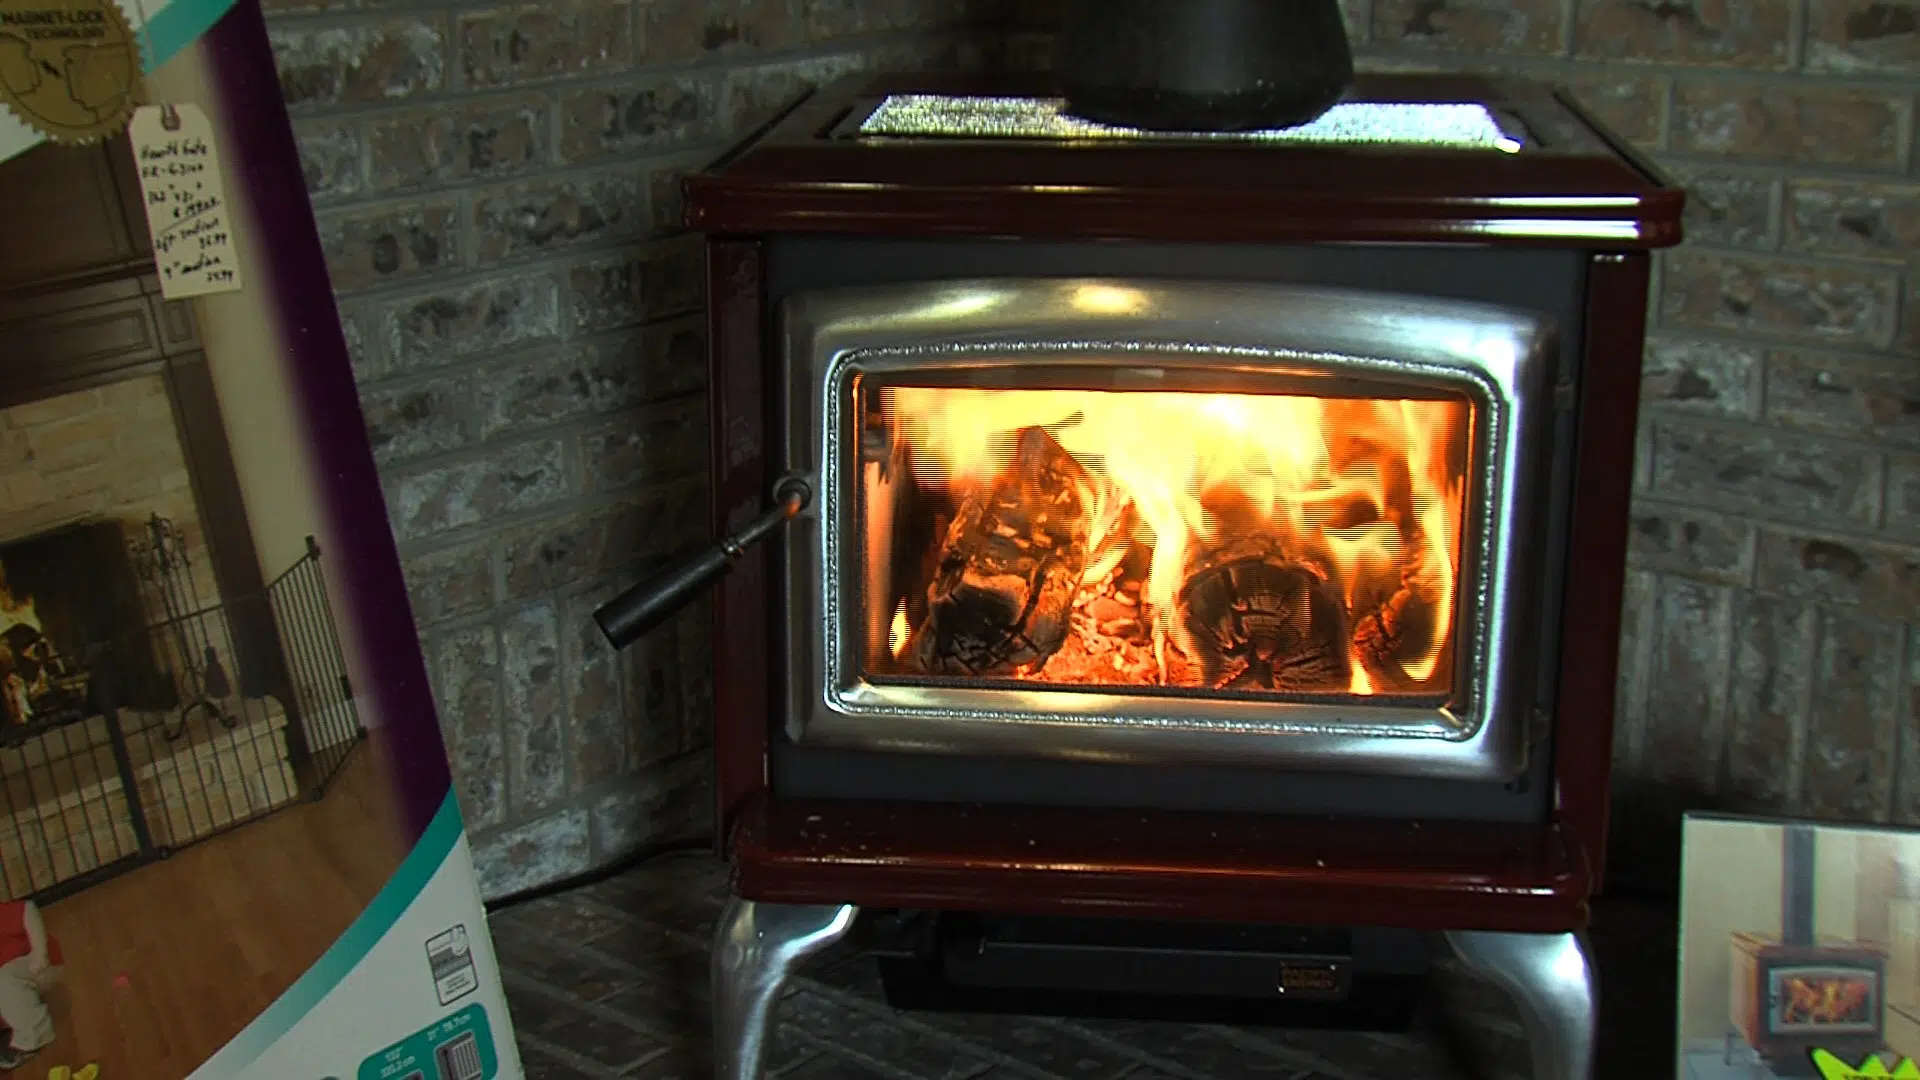 Wood stove rebate program intended to improve air quality CKPGToday.ca